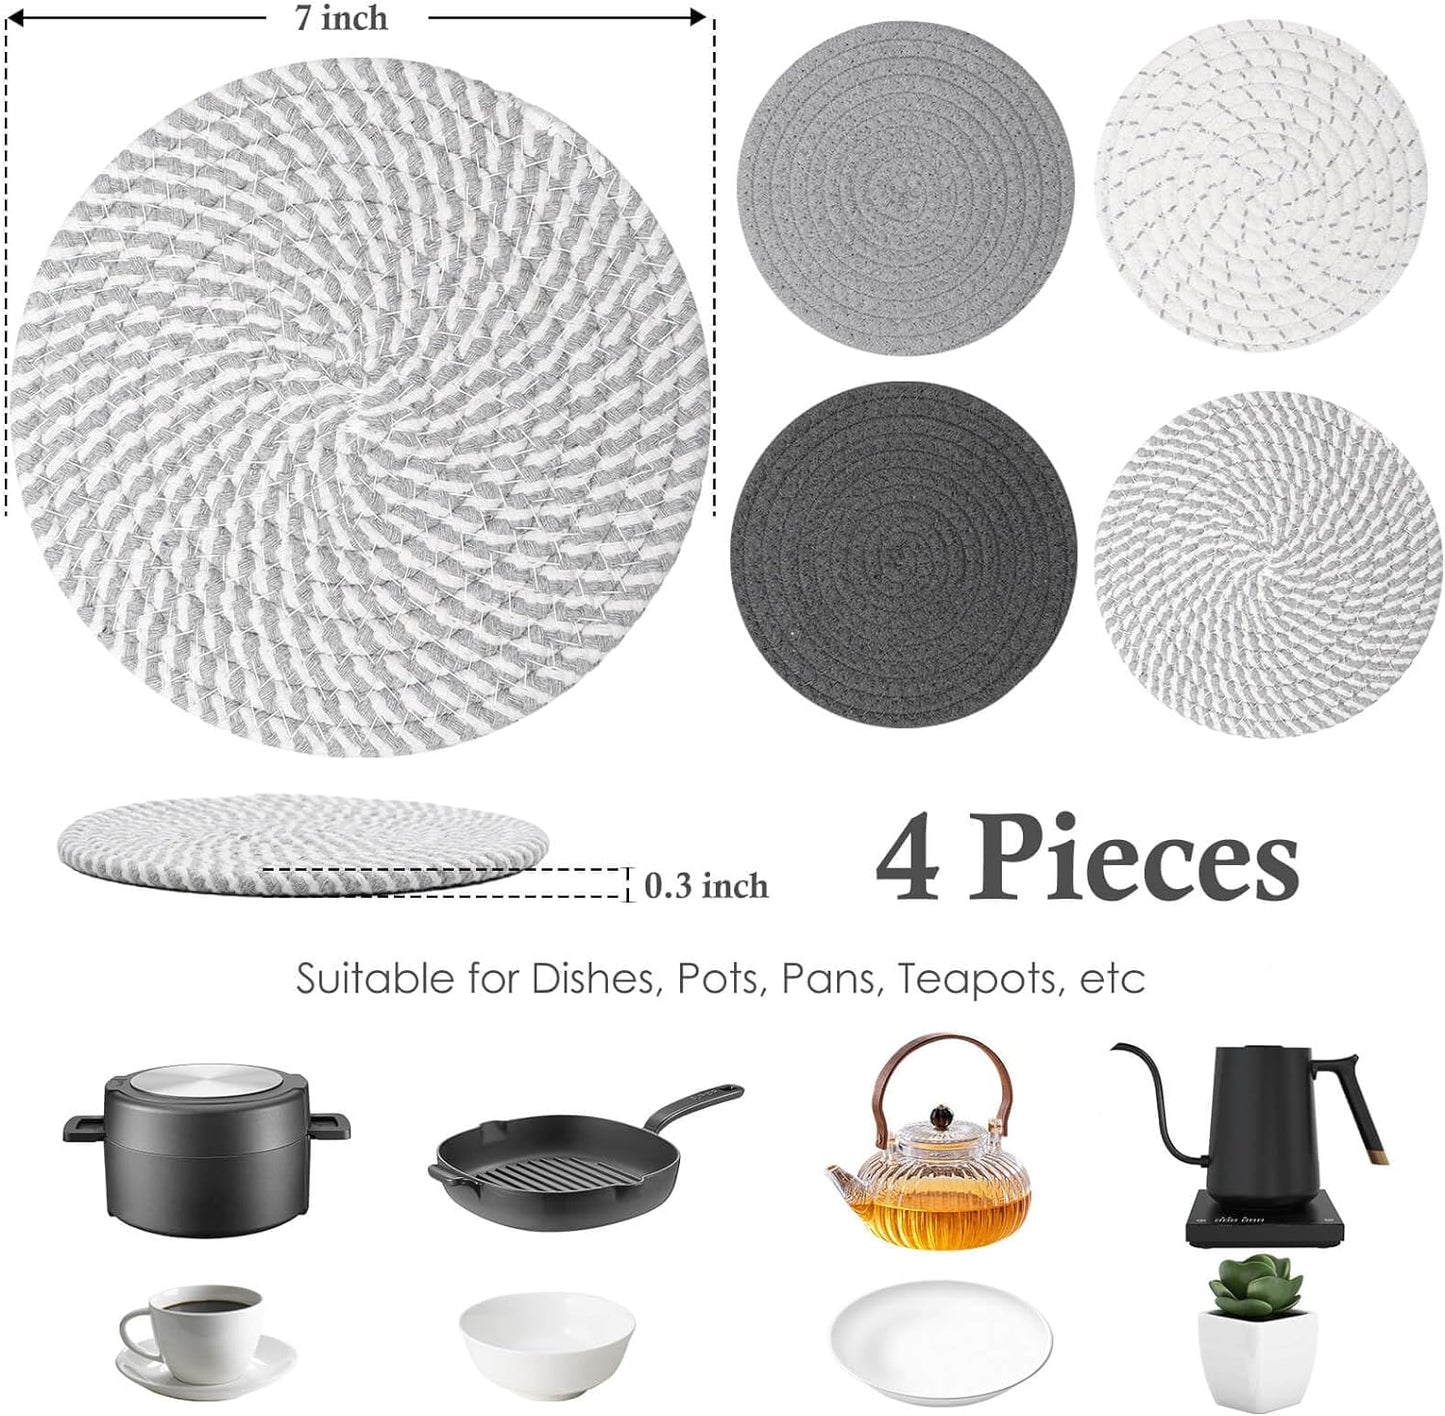 7" Trivets for Hot Dishes, Hot Pots and Pans, 4 Heat Resistant Hot Pads, Pot Holders for Kitchen, Hot Plate Mats for Kitchen Countertops, Table, Home Essentials for New Home and Farmhouse Decor